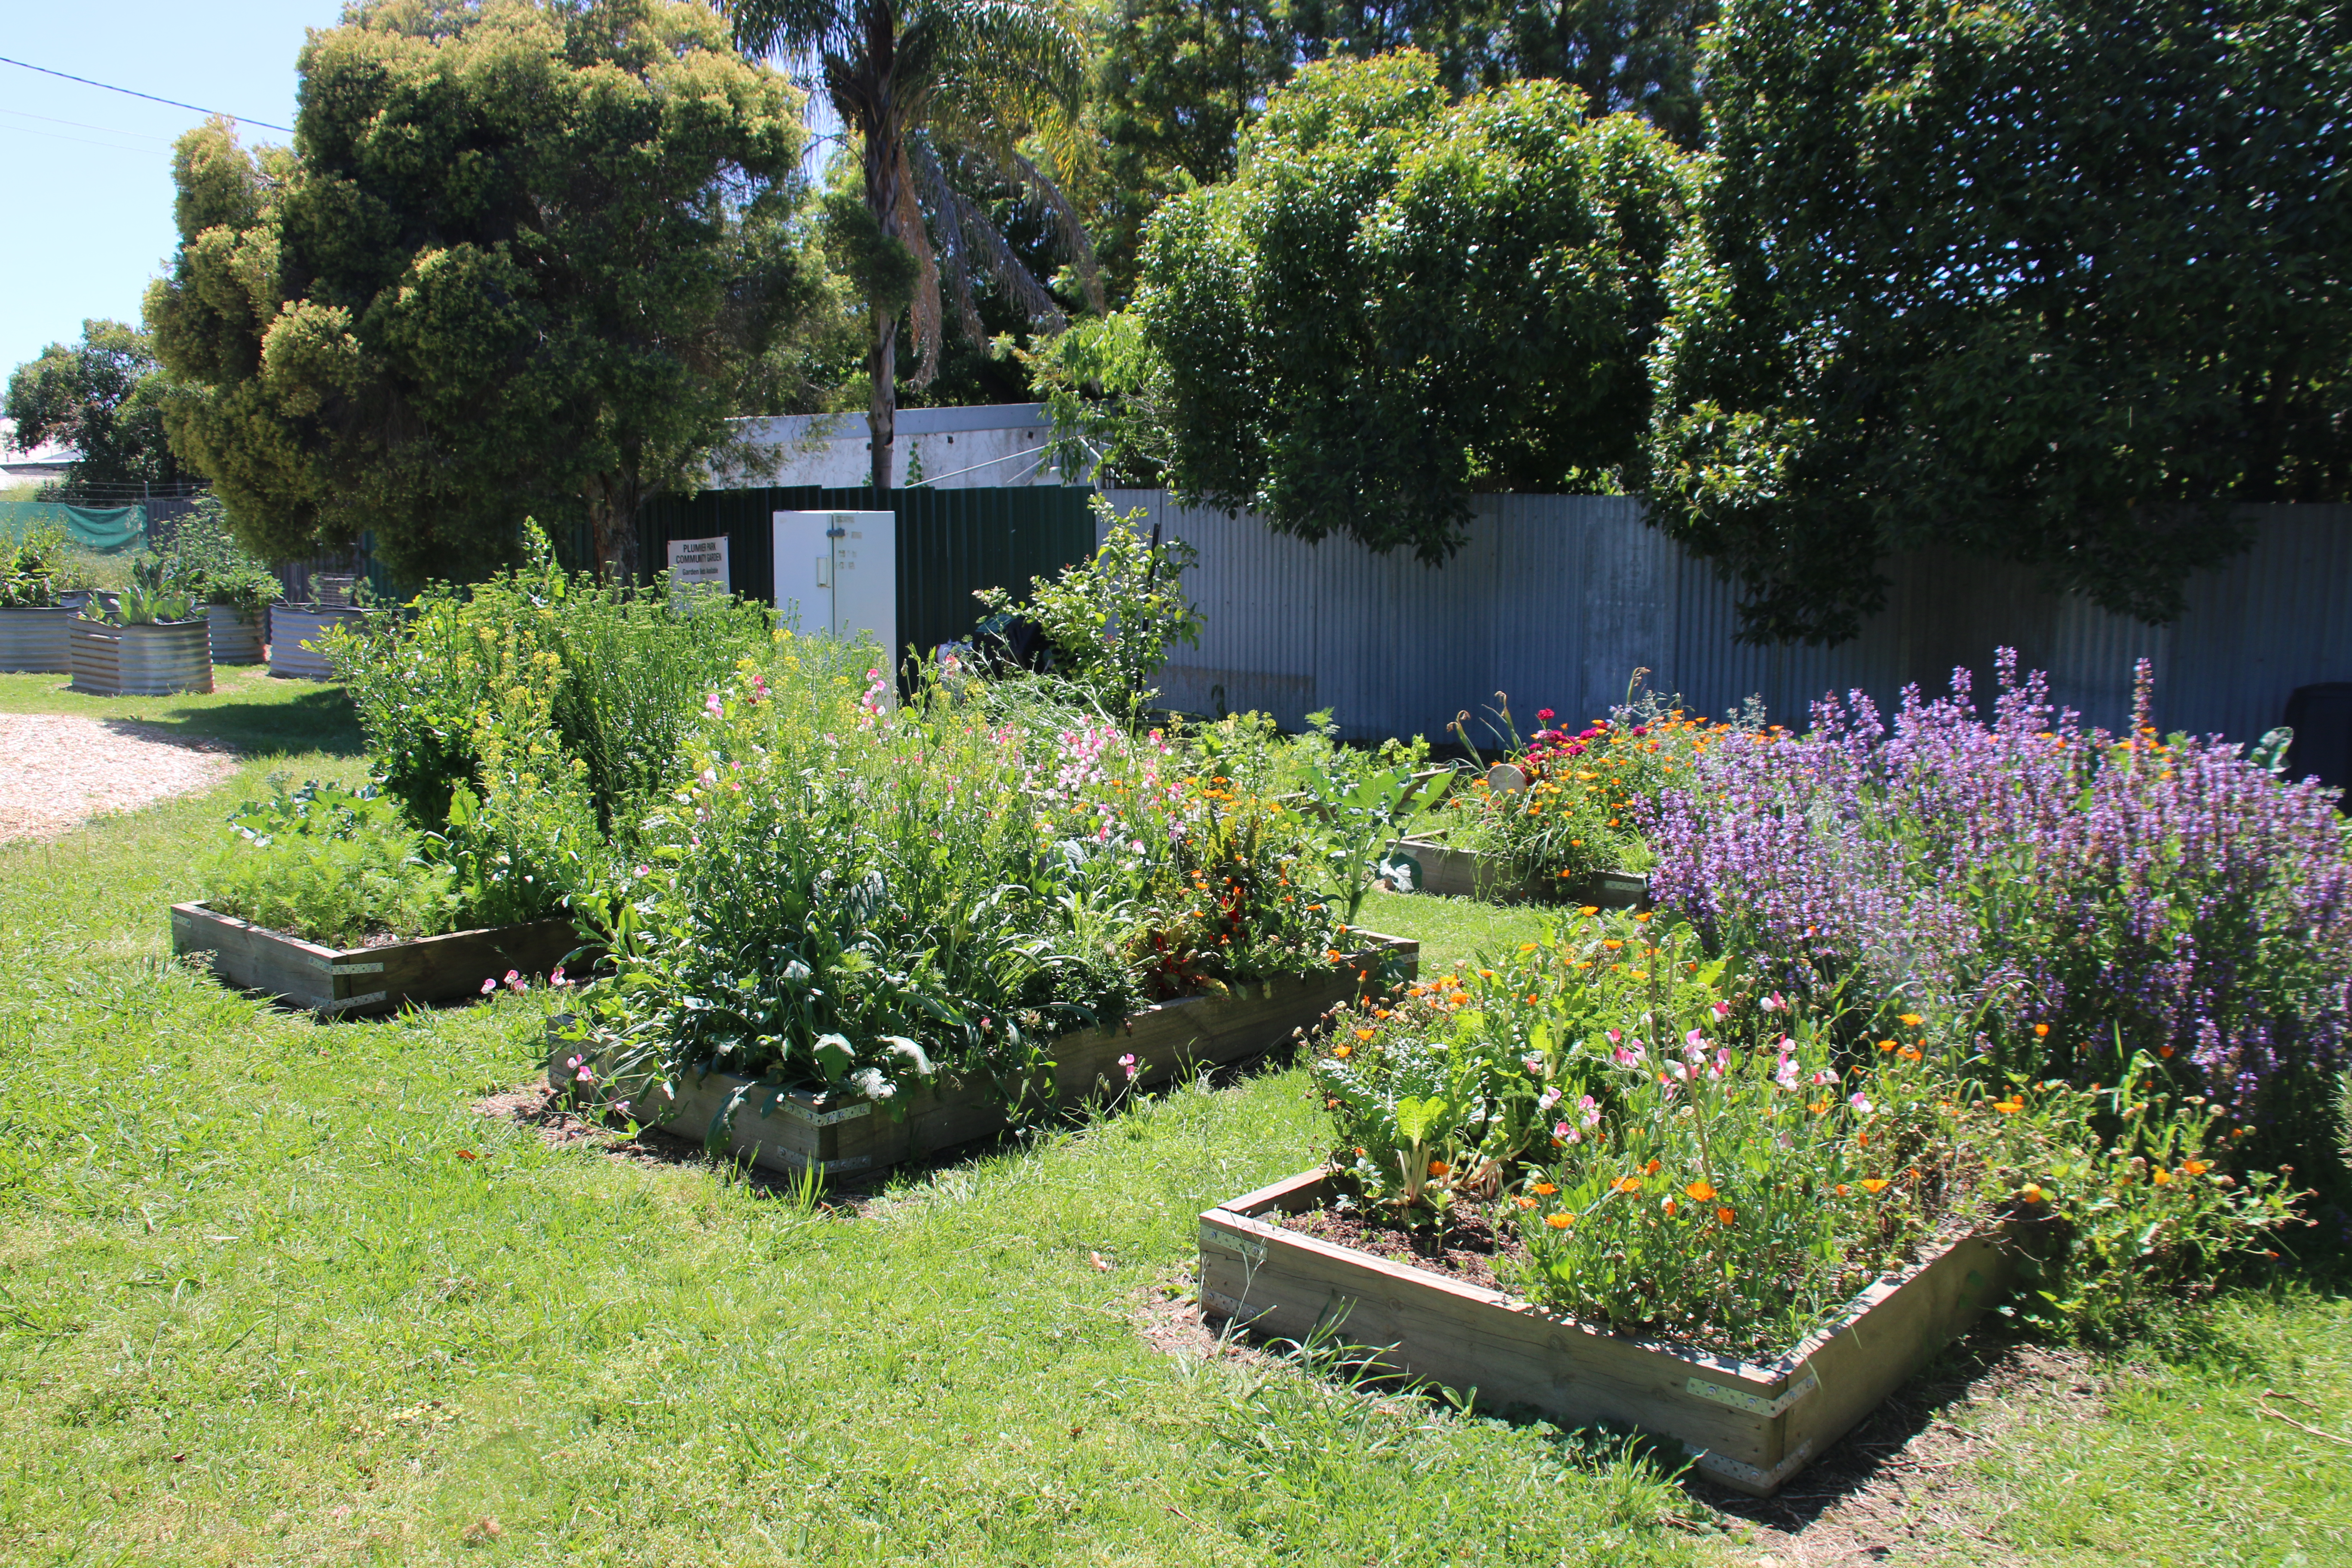 Various raised and wicking garden beds with flowers, herbs and vegetables growing.